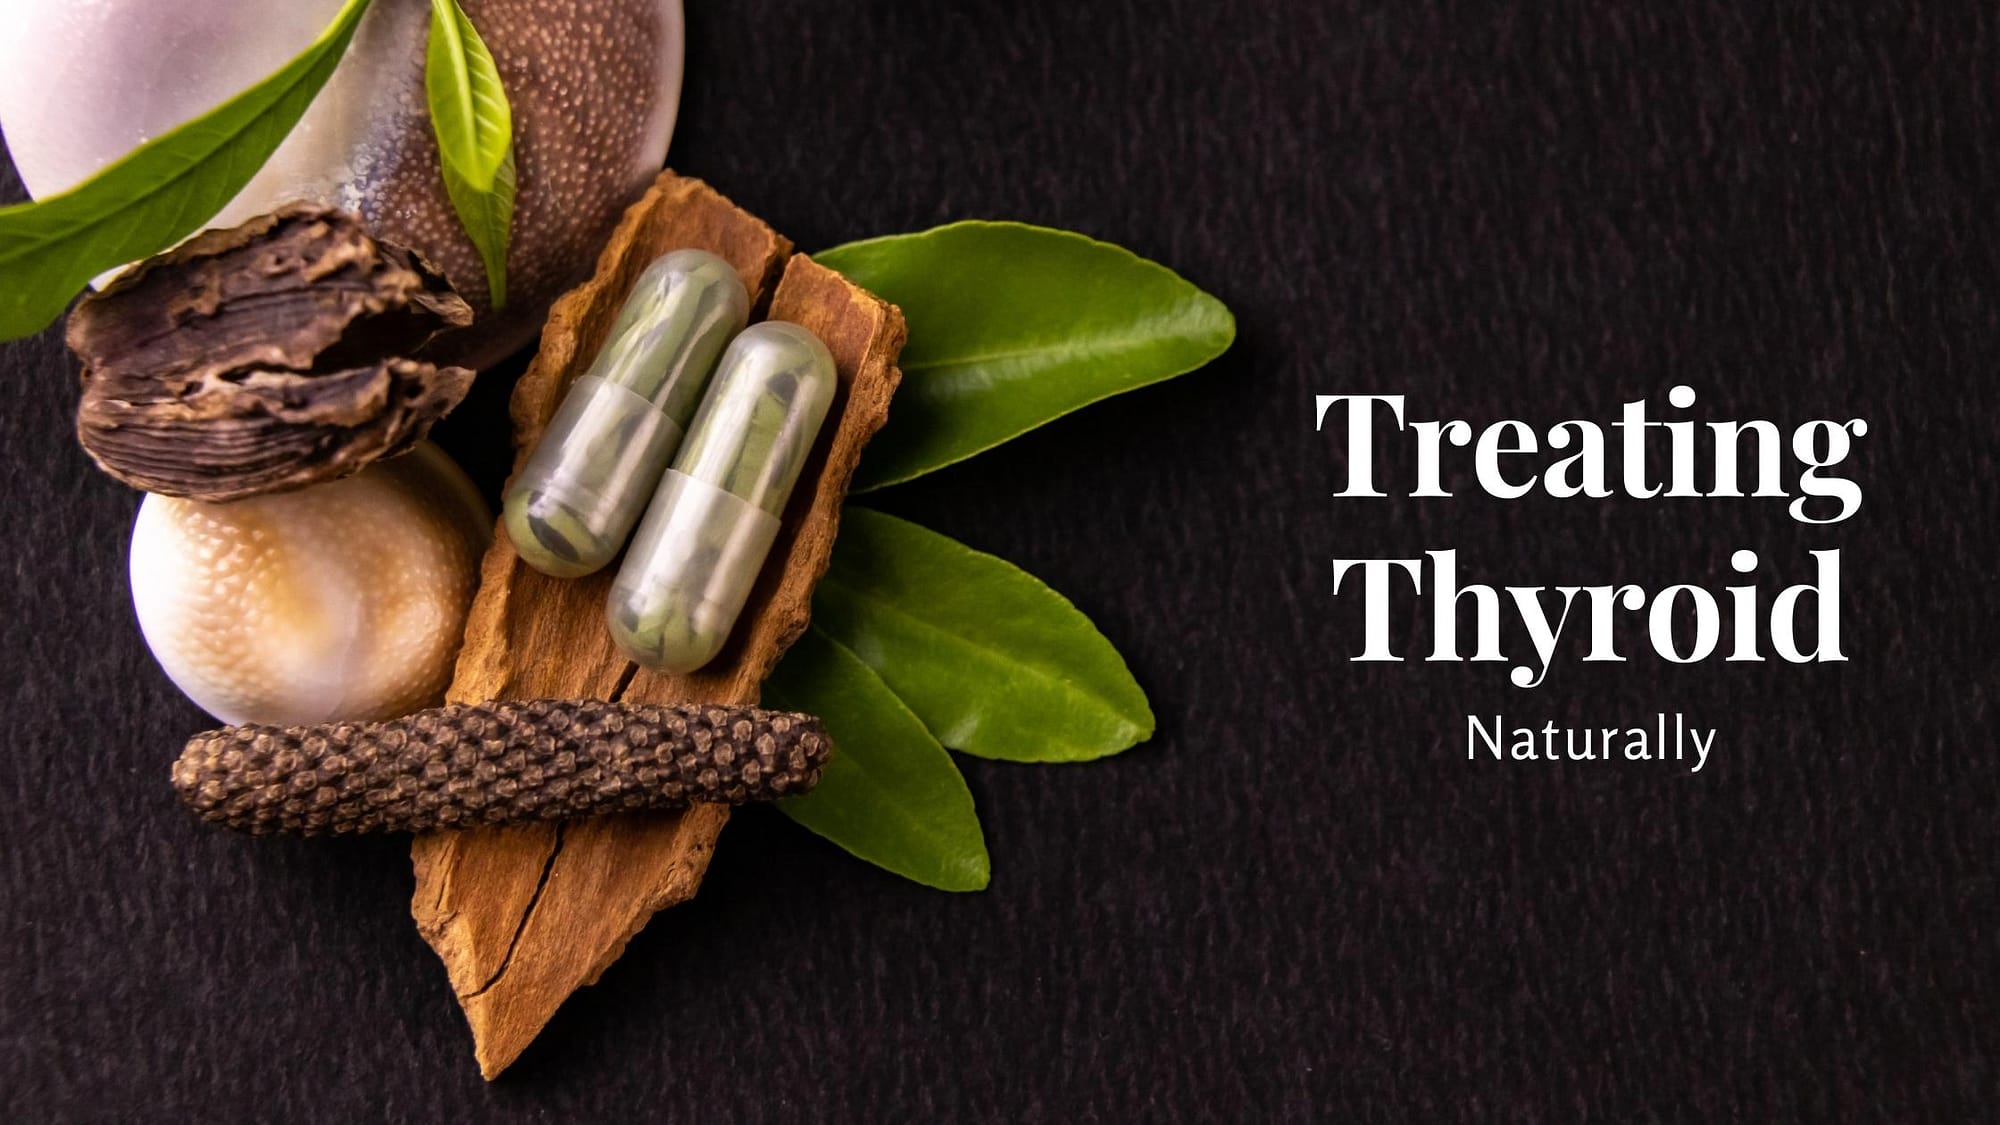 how to treat thyroid naturally